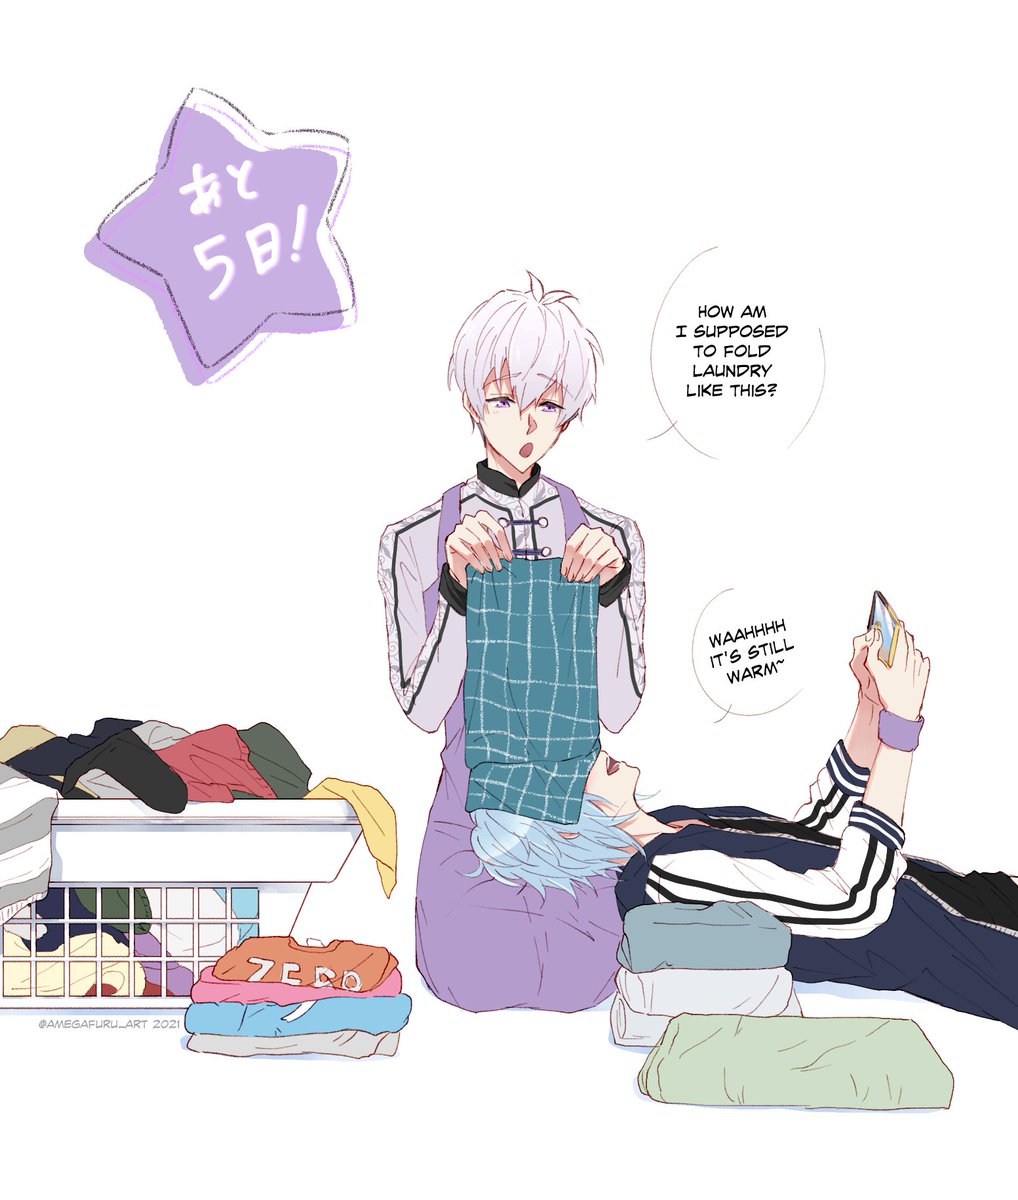 [Tamaki birthday countdown]
day 5 💜

few things are better than shoving your face into a pile of fresh warm laundry 👕 